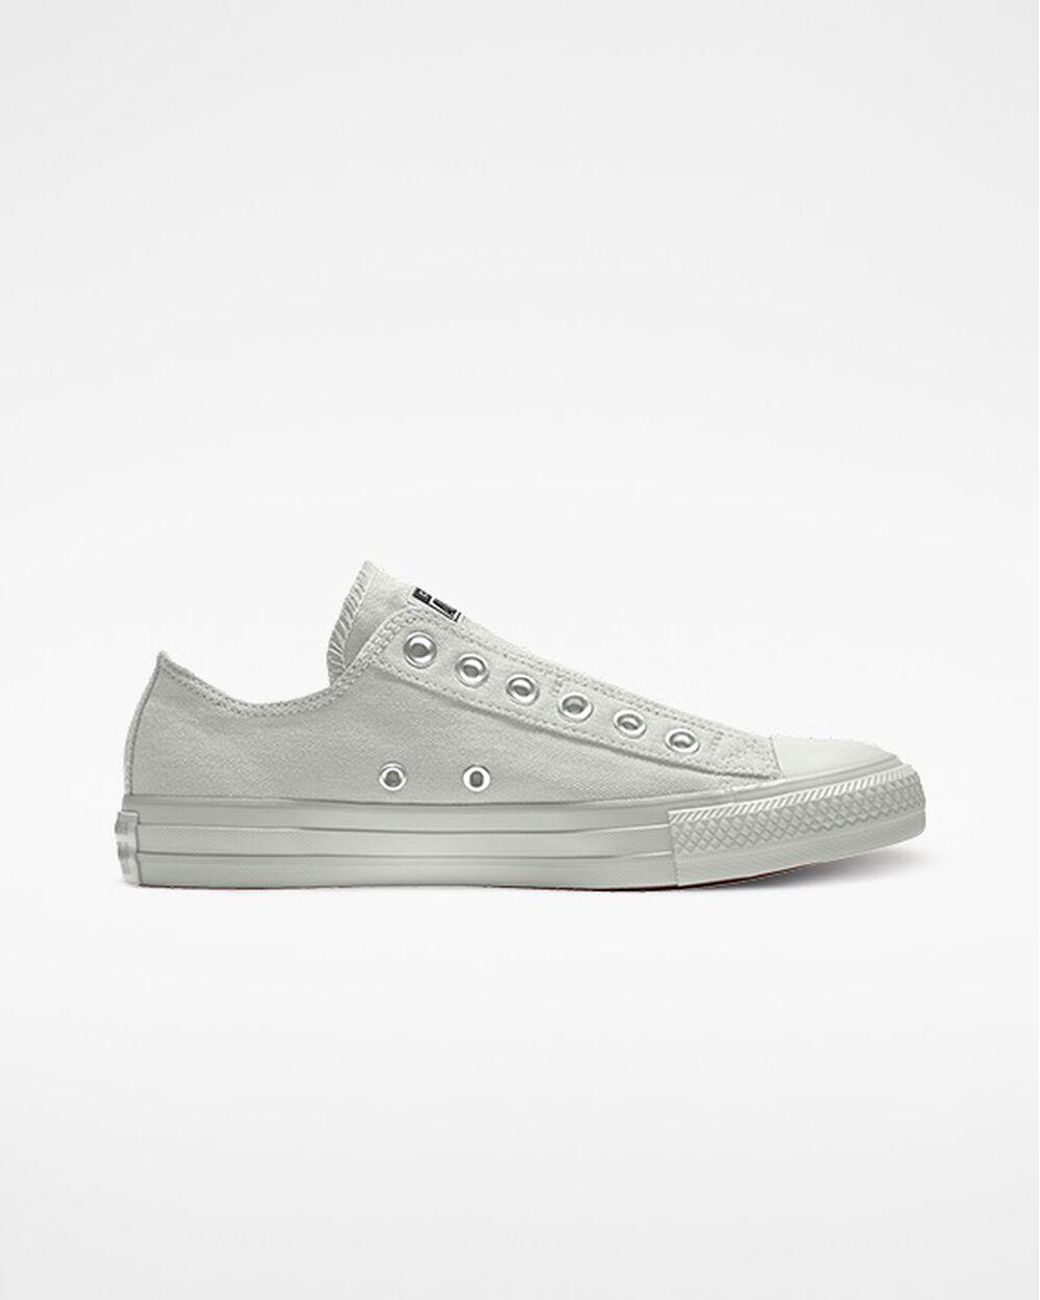 Converse Custom Chuck Taylor All Star Slip By You in White | Lyst